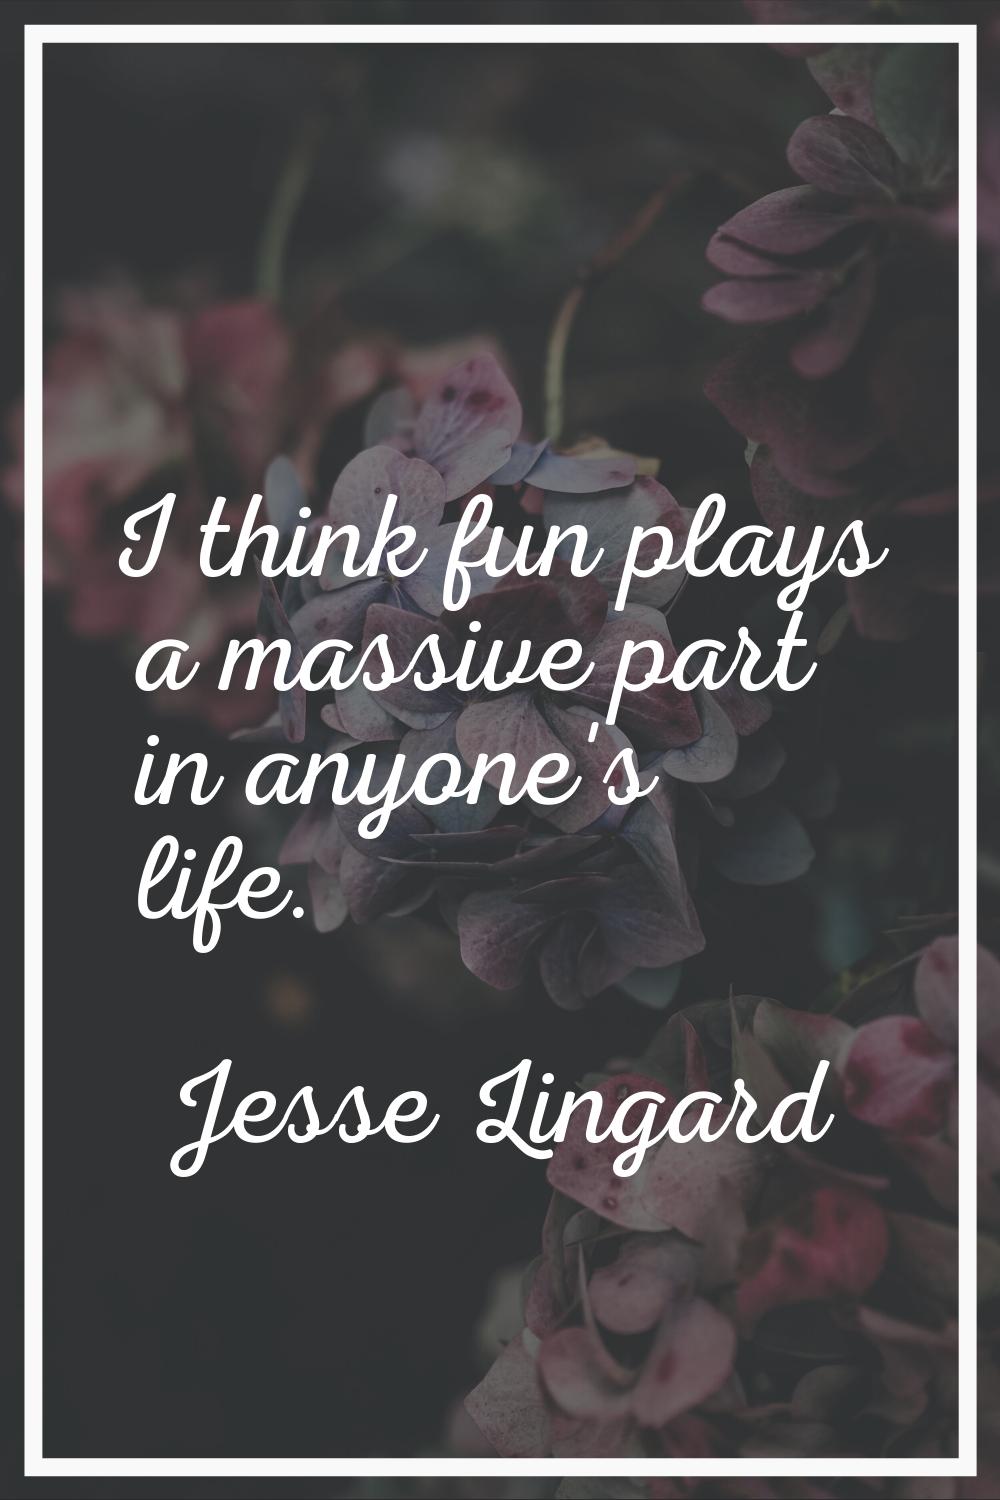 I think fun plays a massive part in anyone's life.